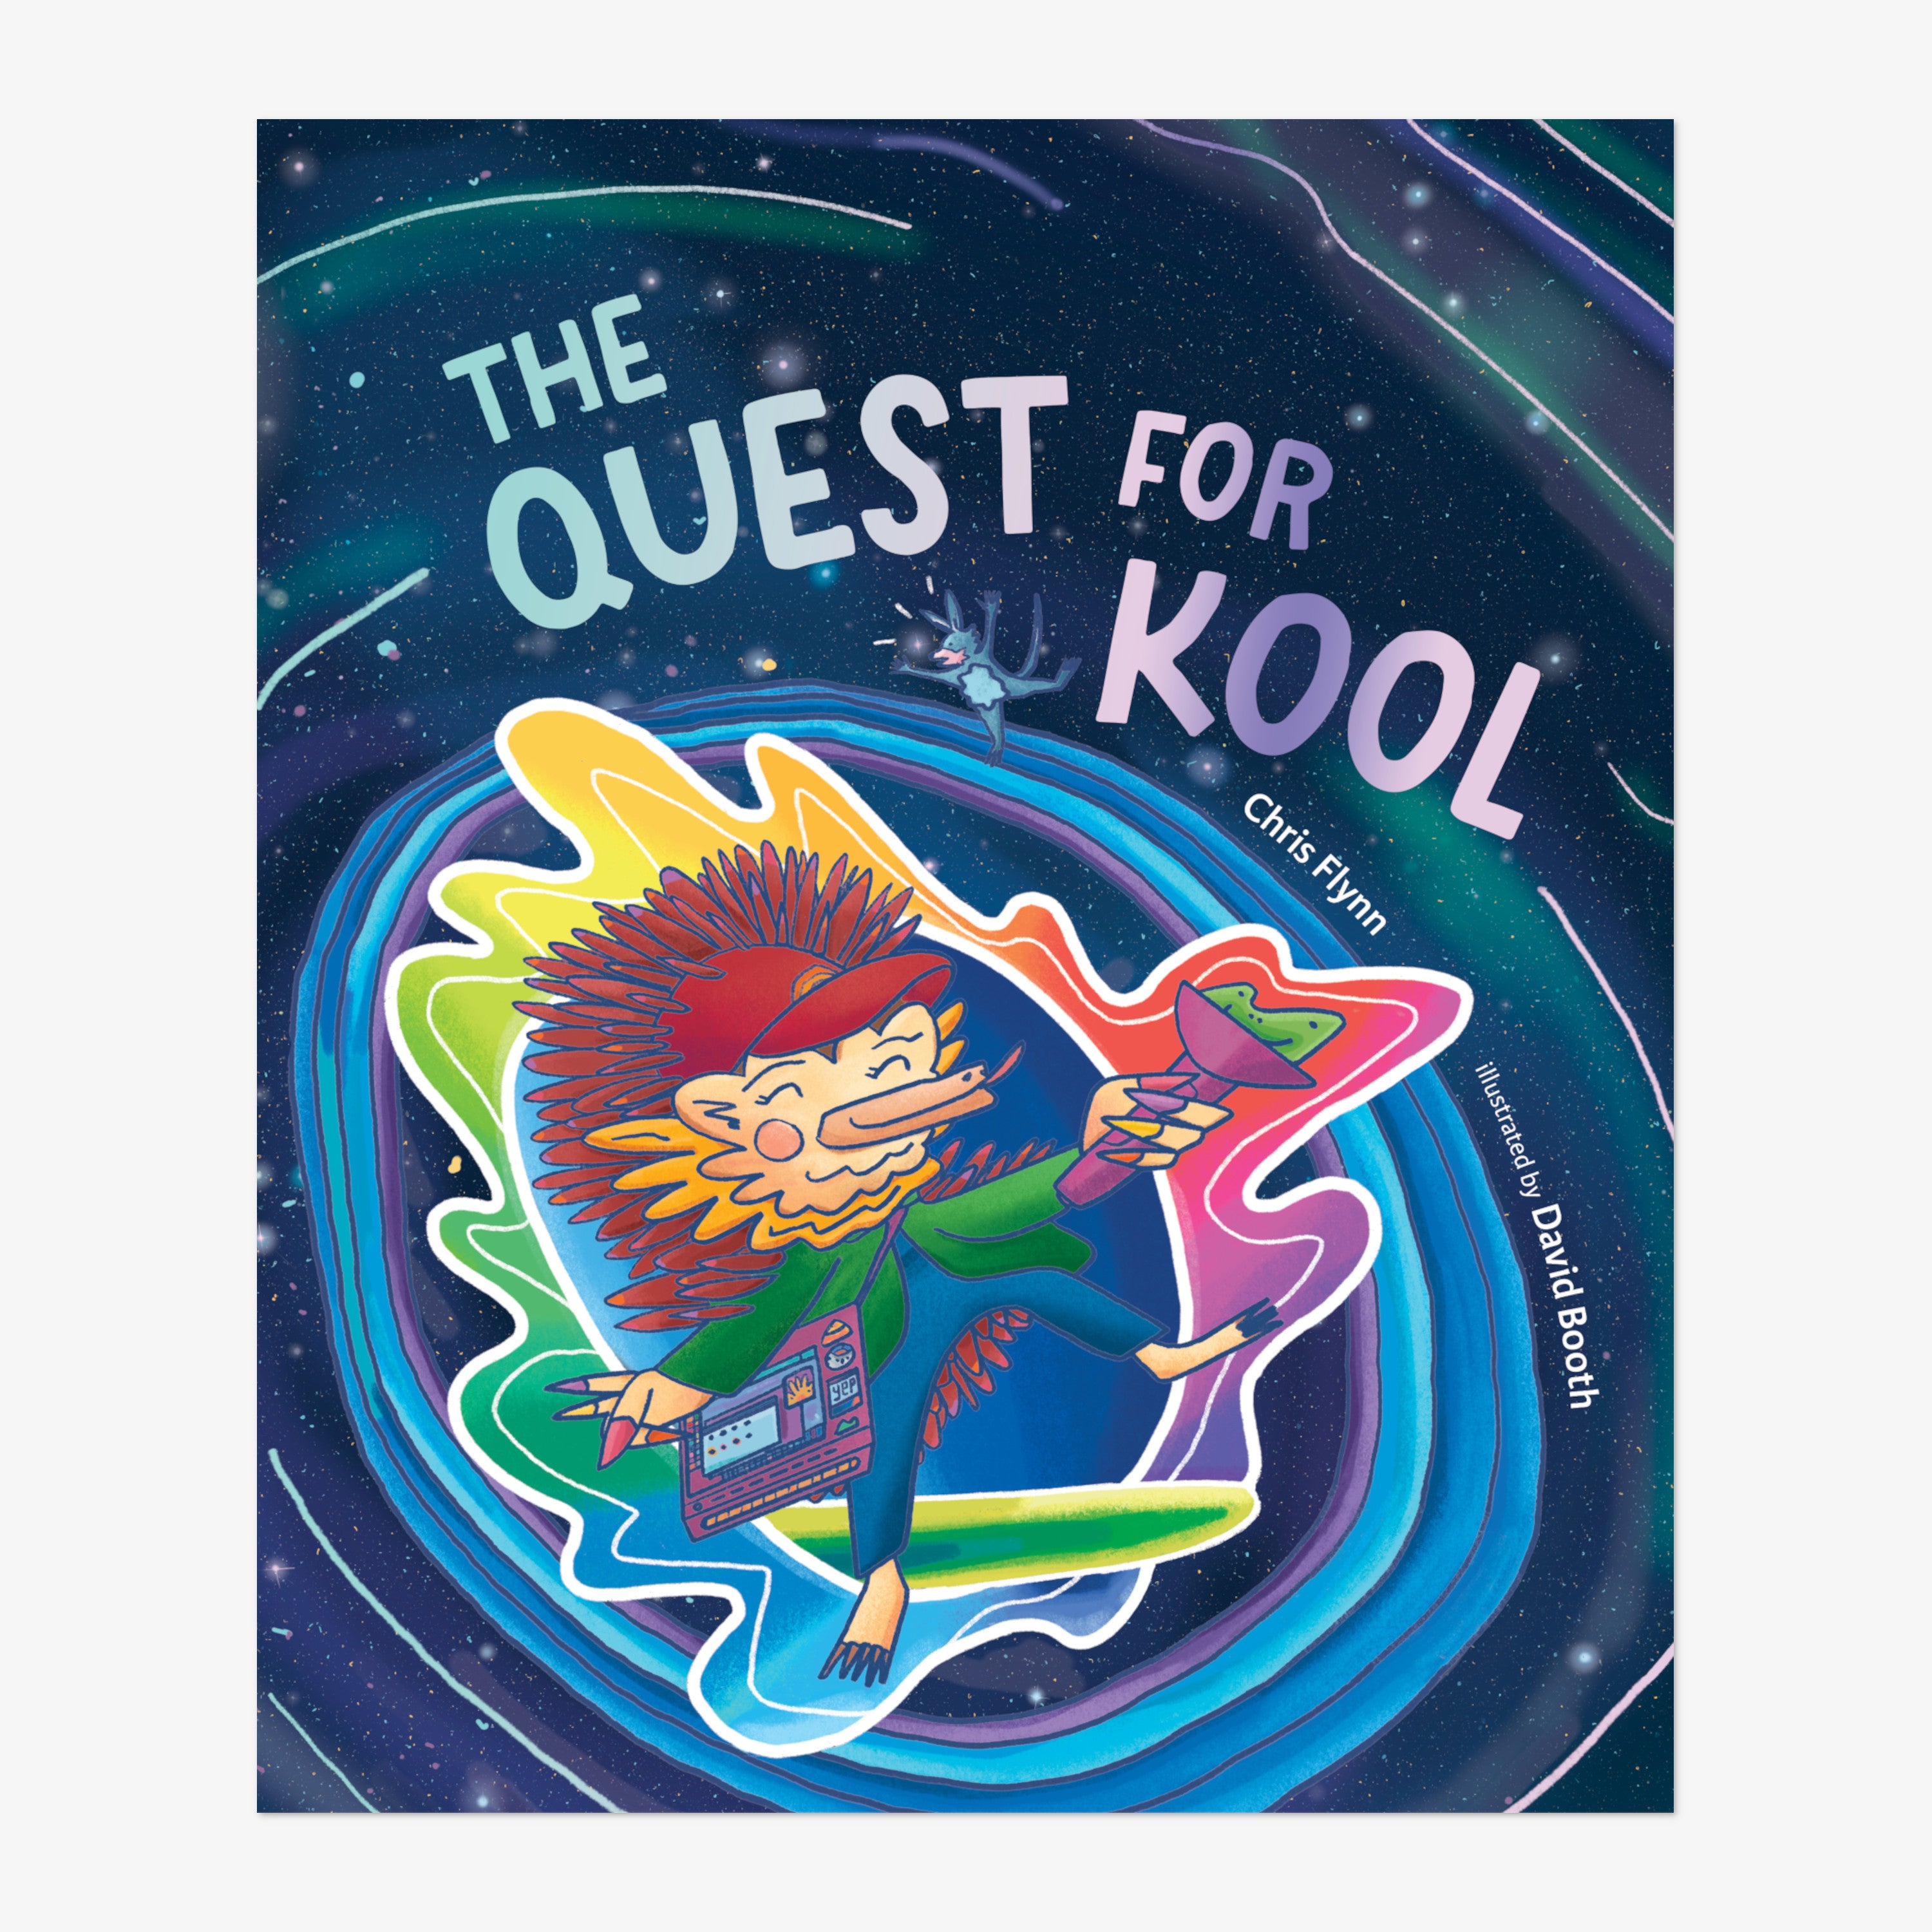 The Quest for Kool